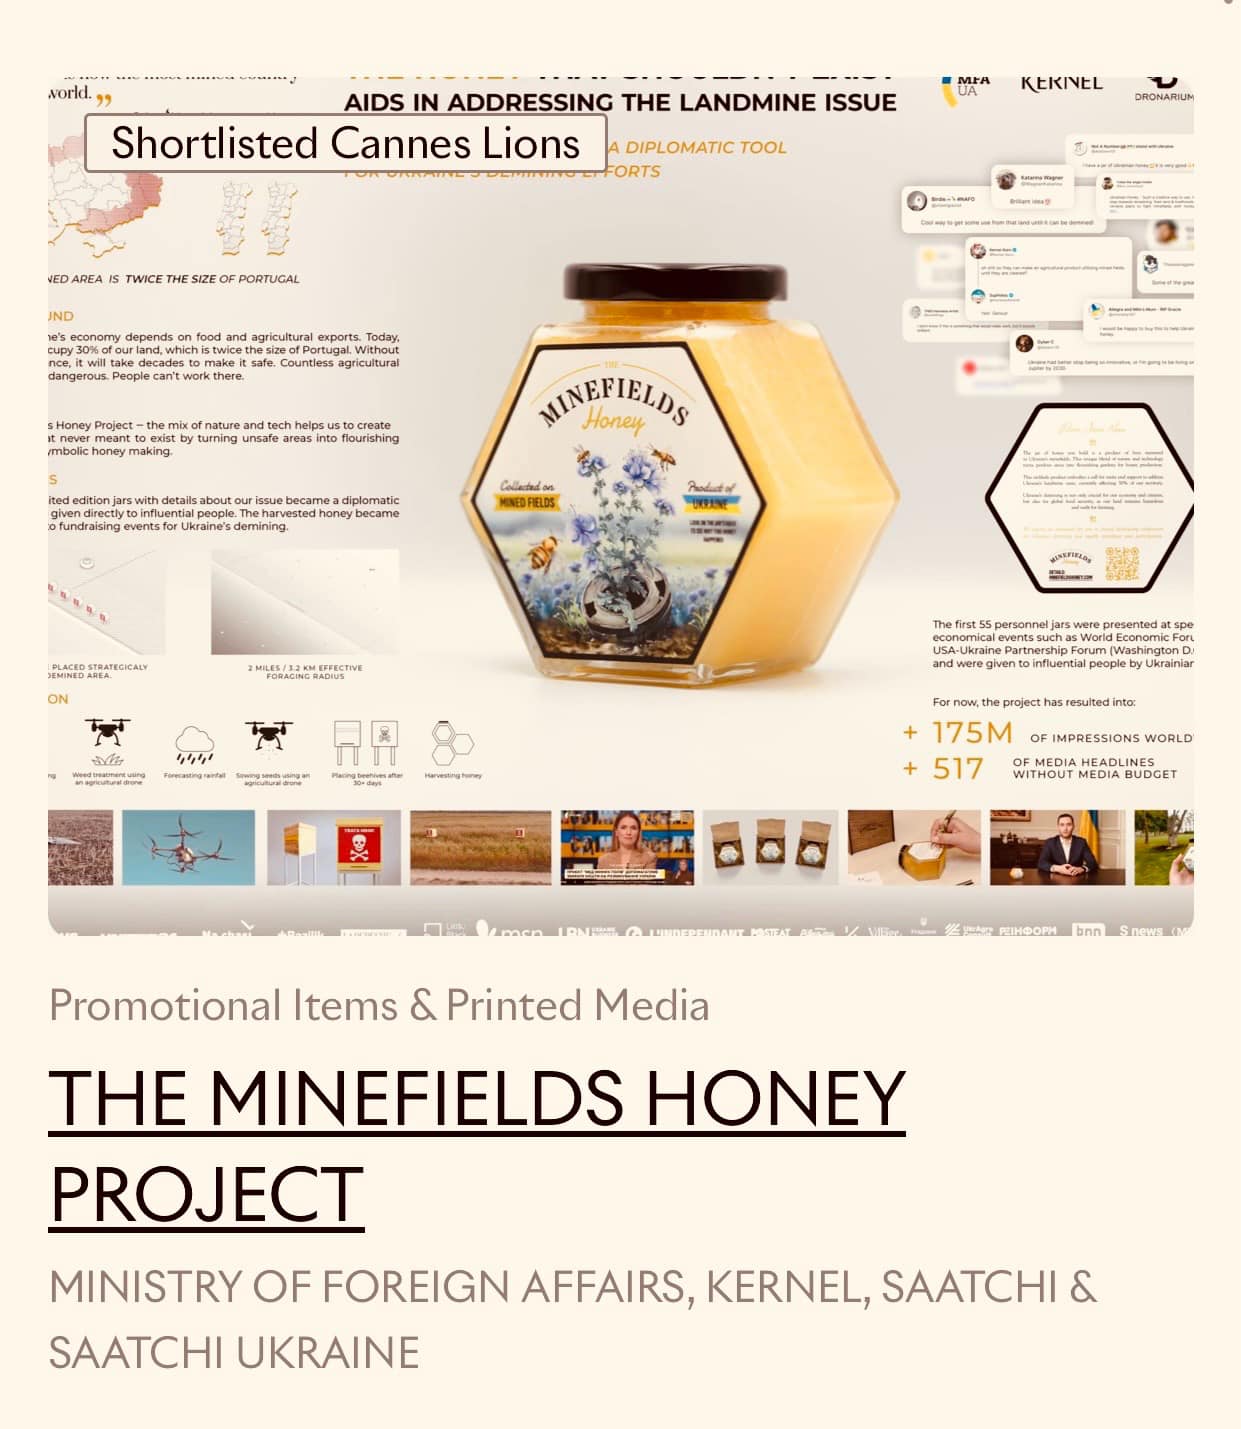 The Ukrainian project “Minefields Honey” is shortlisted at the Cannes Lions 2024